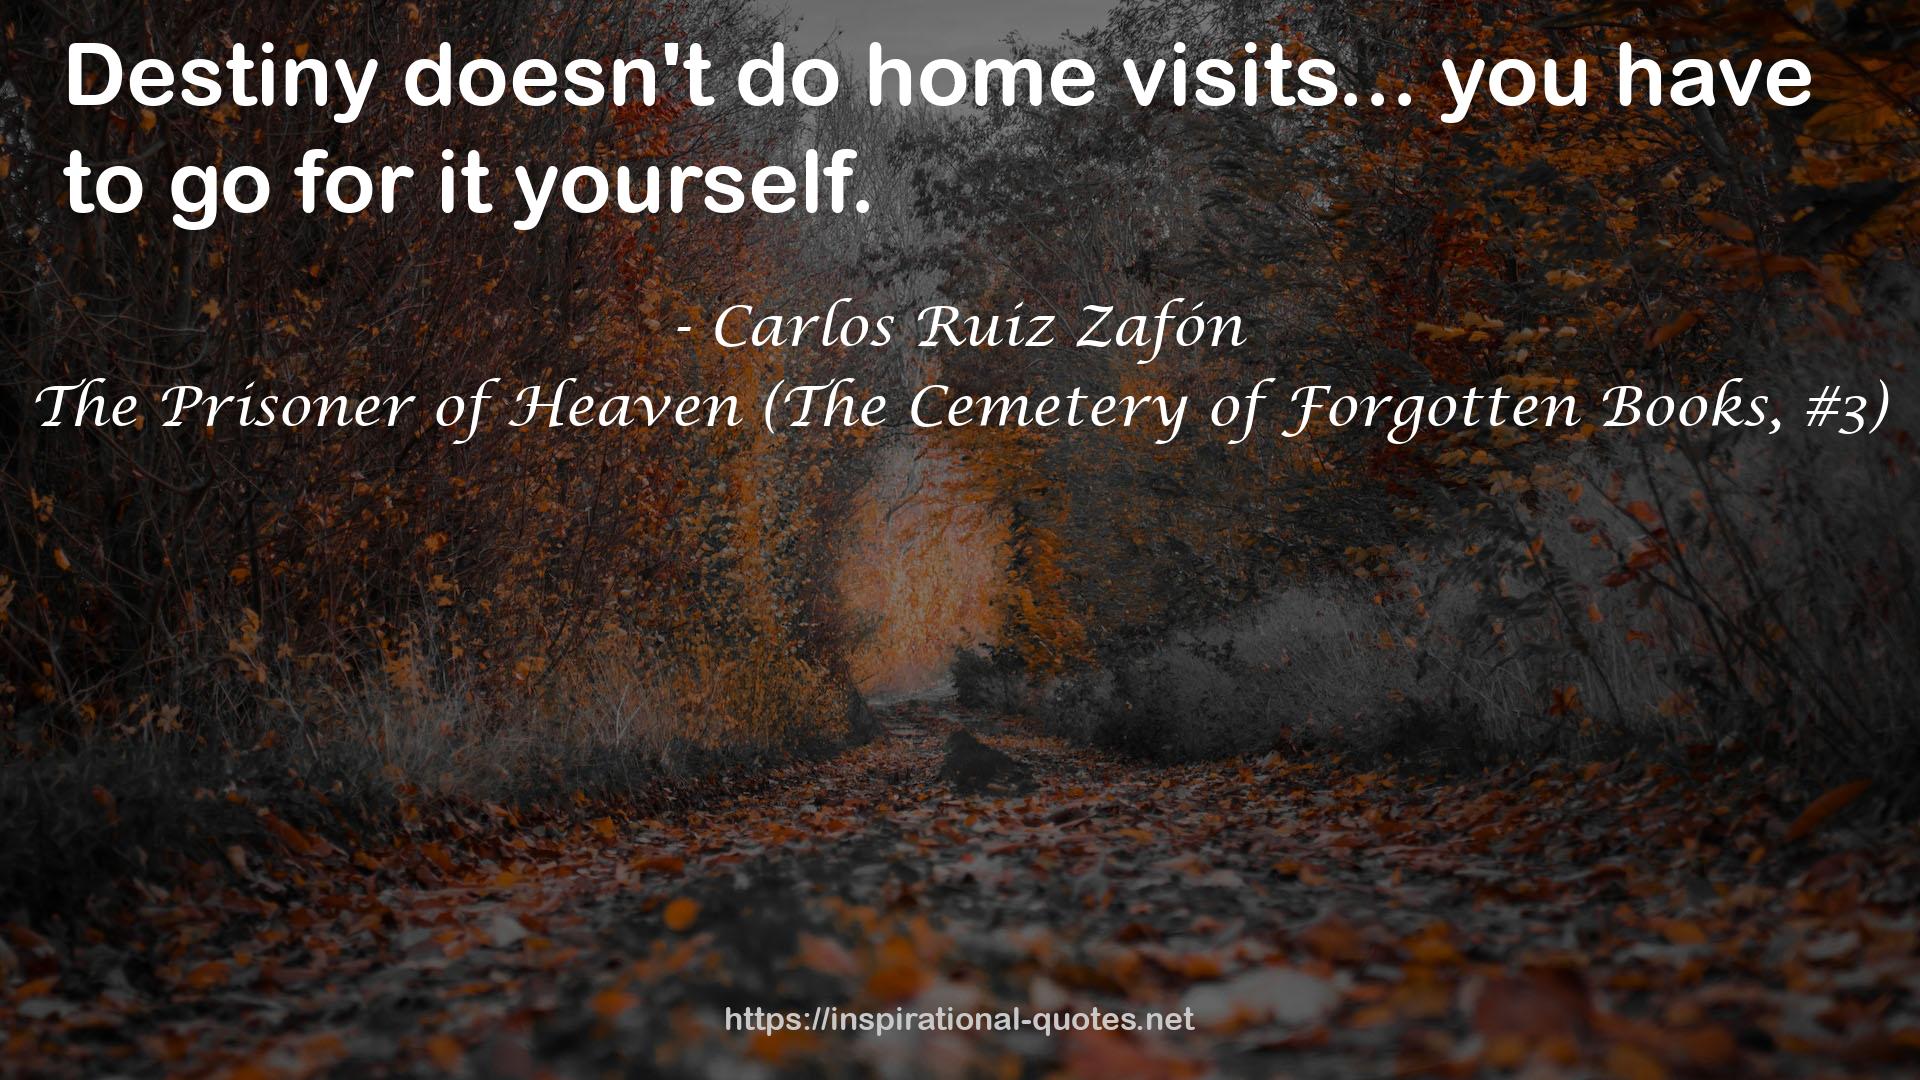 The Prisoner of Heaven (The Cemetery of Forgotten Books, #3) QUOTES